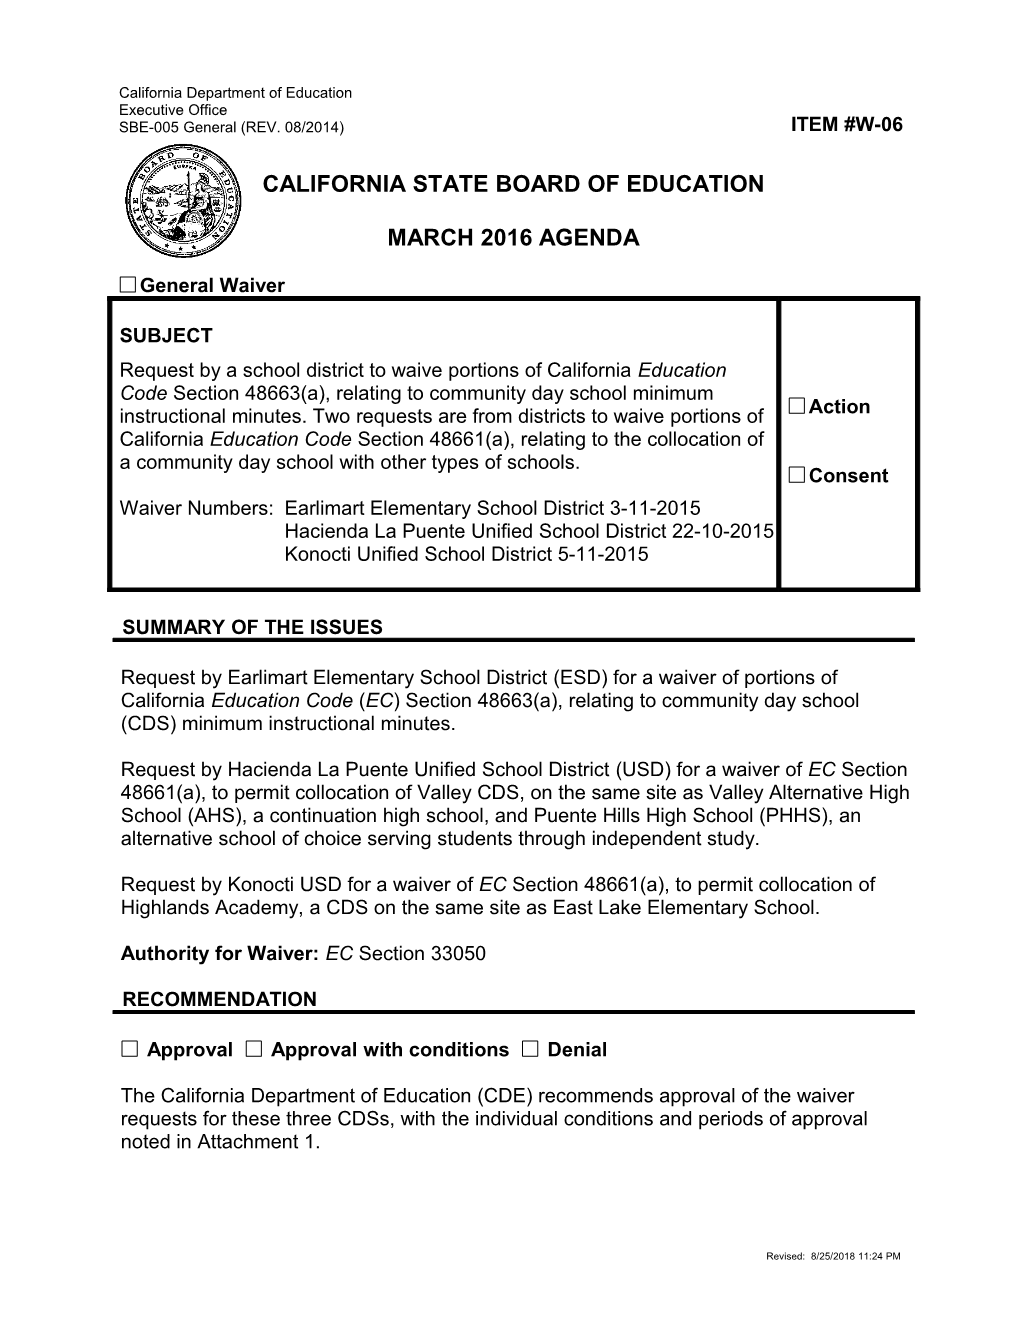 March 2016 Waiver Item W-06 - Meeting Agendas (CA State Board of Education)